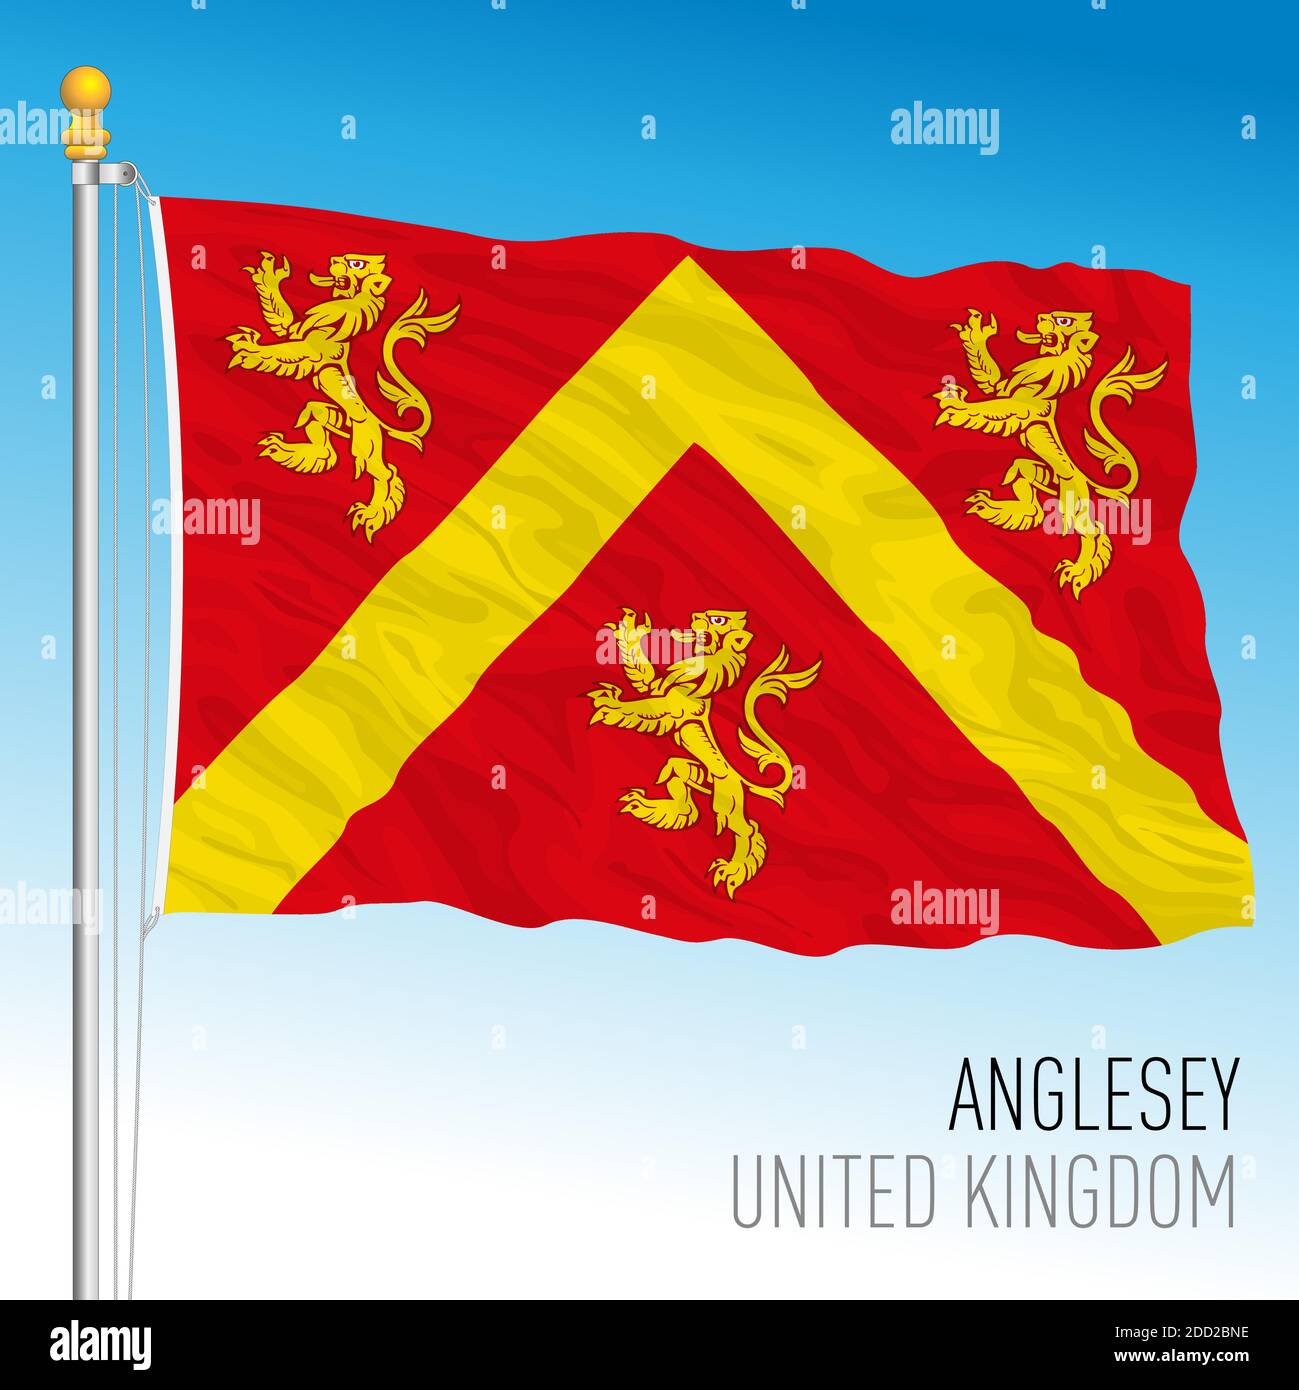 Anglesey county flag, Wales, United Kingdom, vector illustration Stock Vector